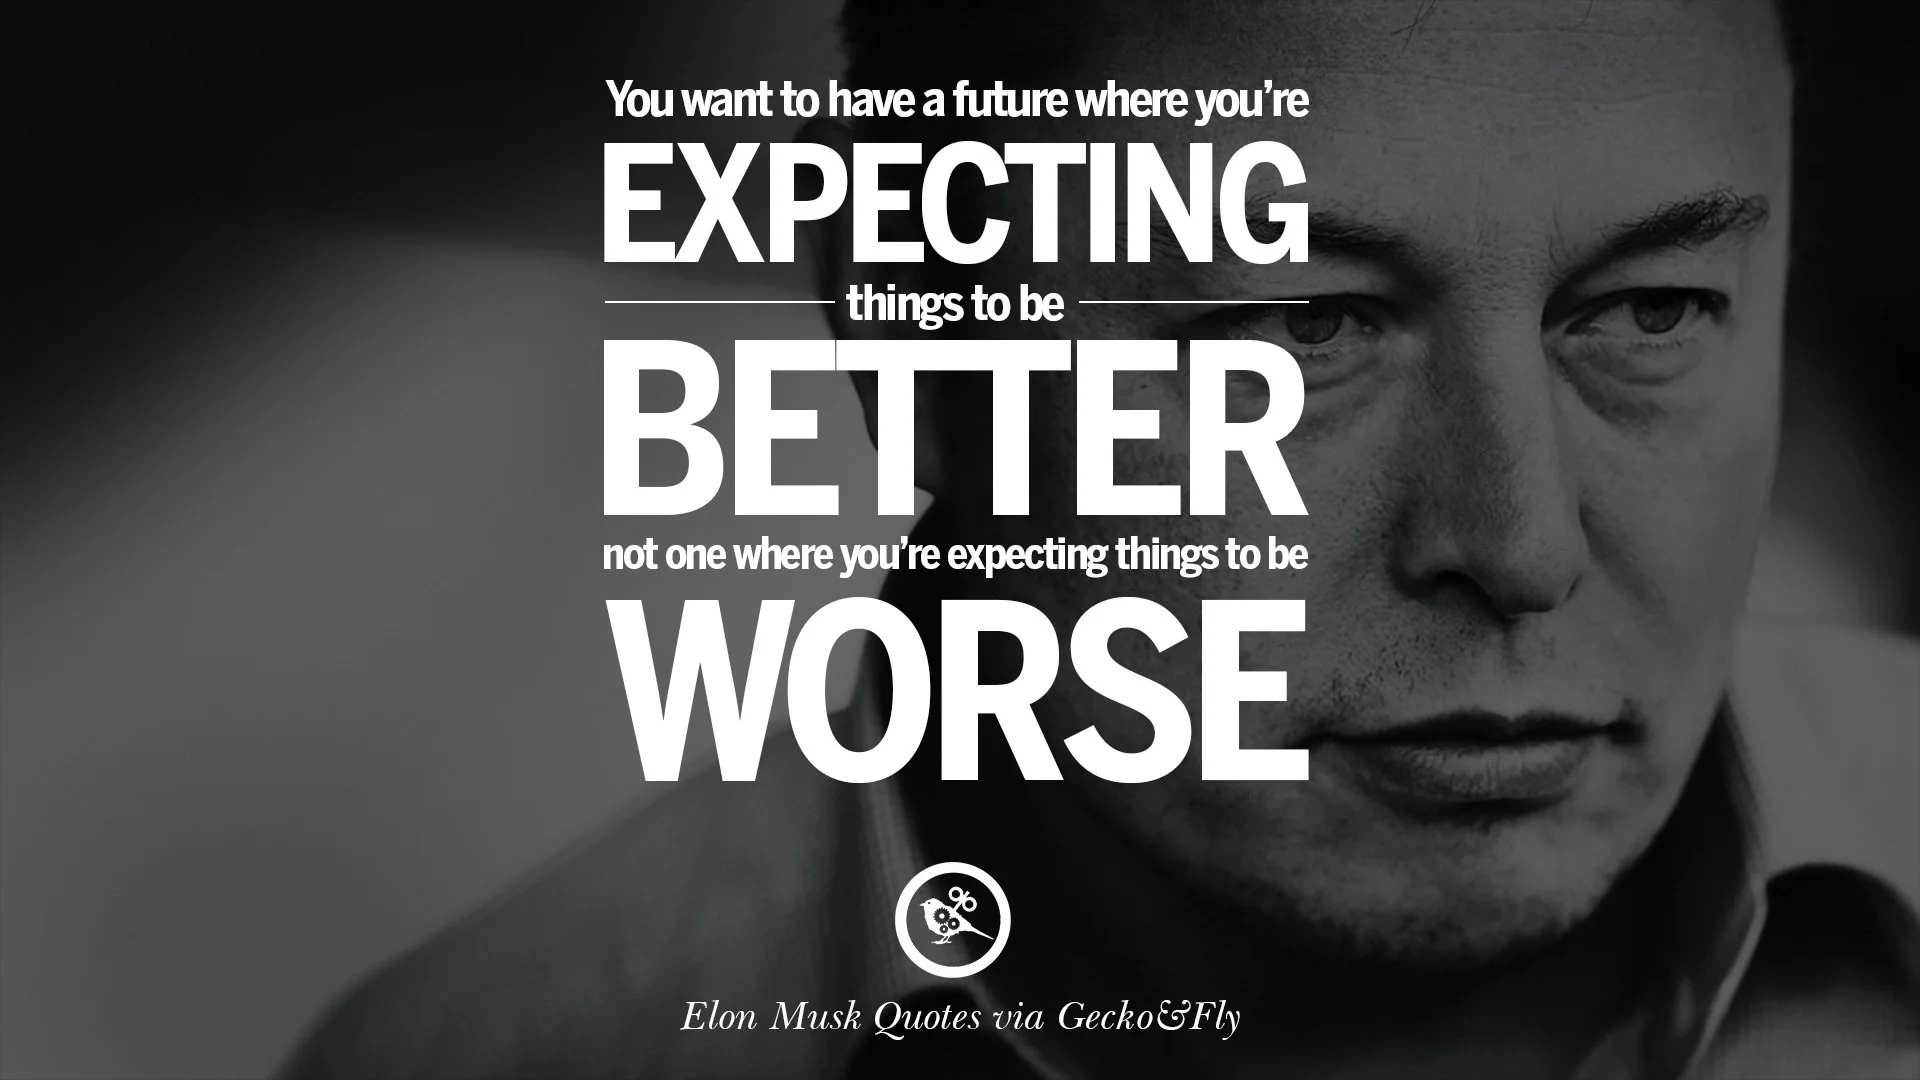 You want to have a future where youre expecting things to be better, not one where youre expecting things to be worse